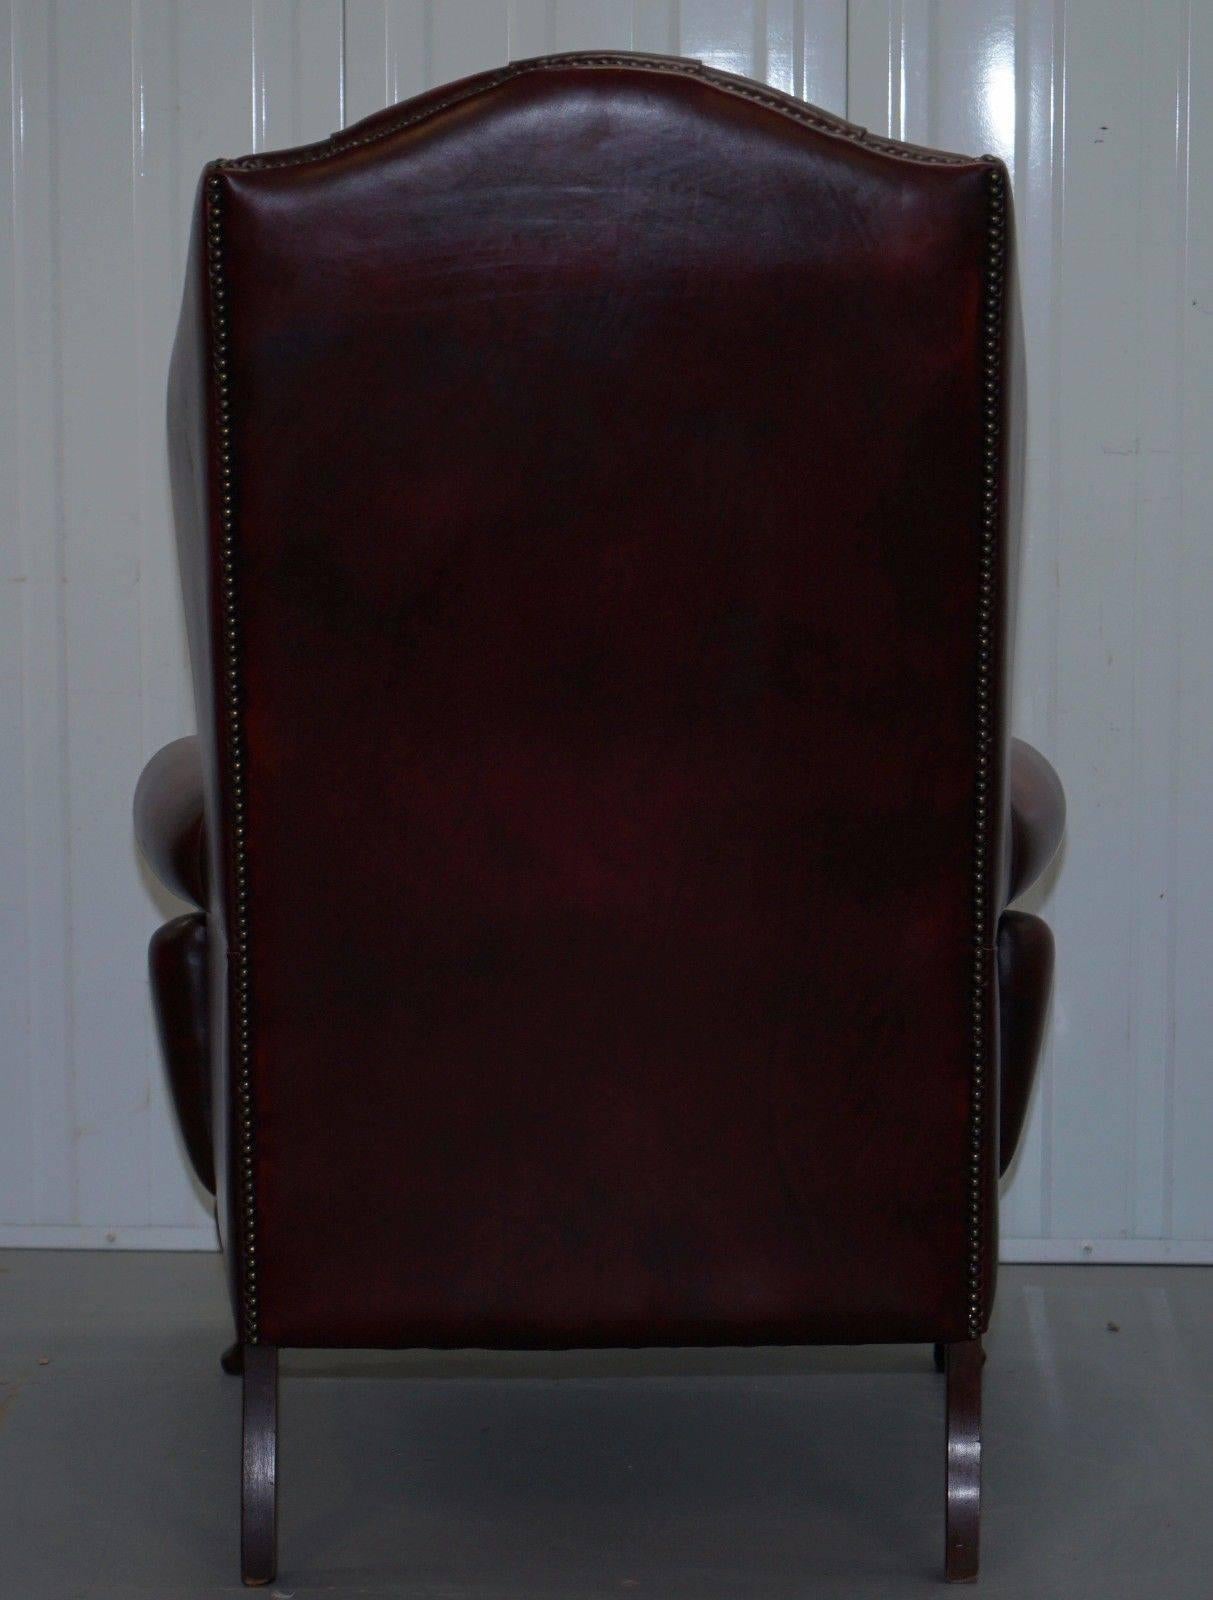 Bevan Funnell November Chesterfield Oxblood Leather Wingback Armchair 1